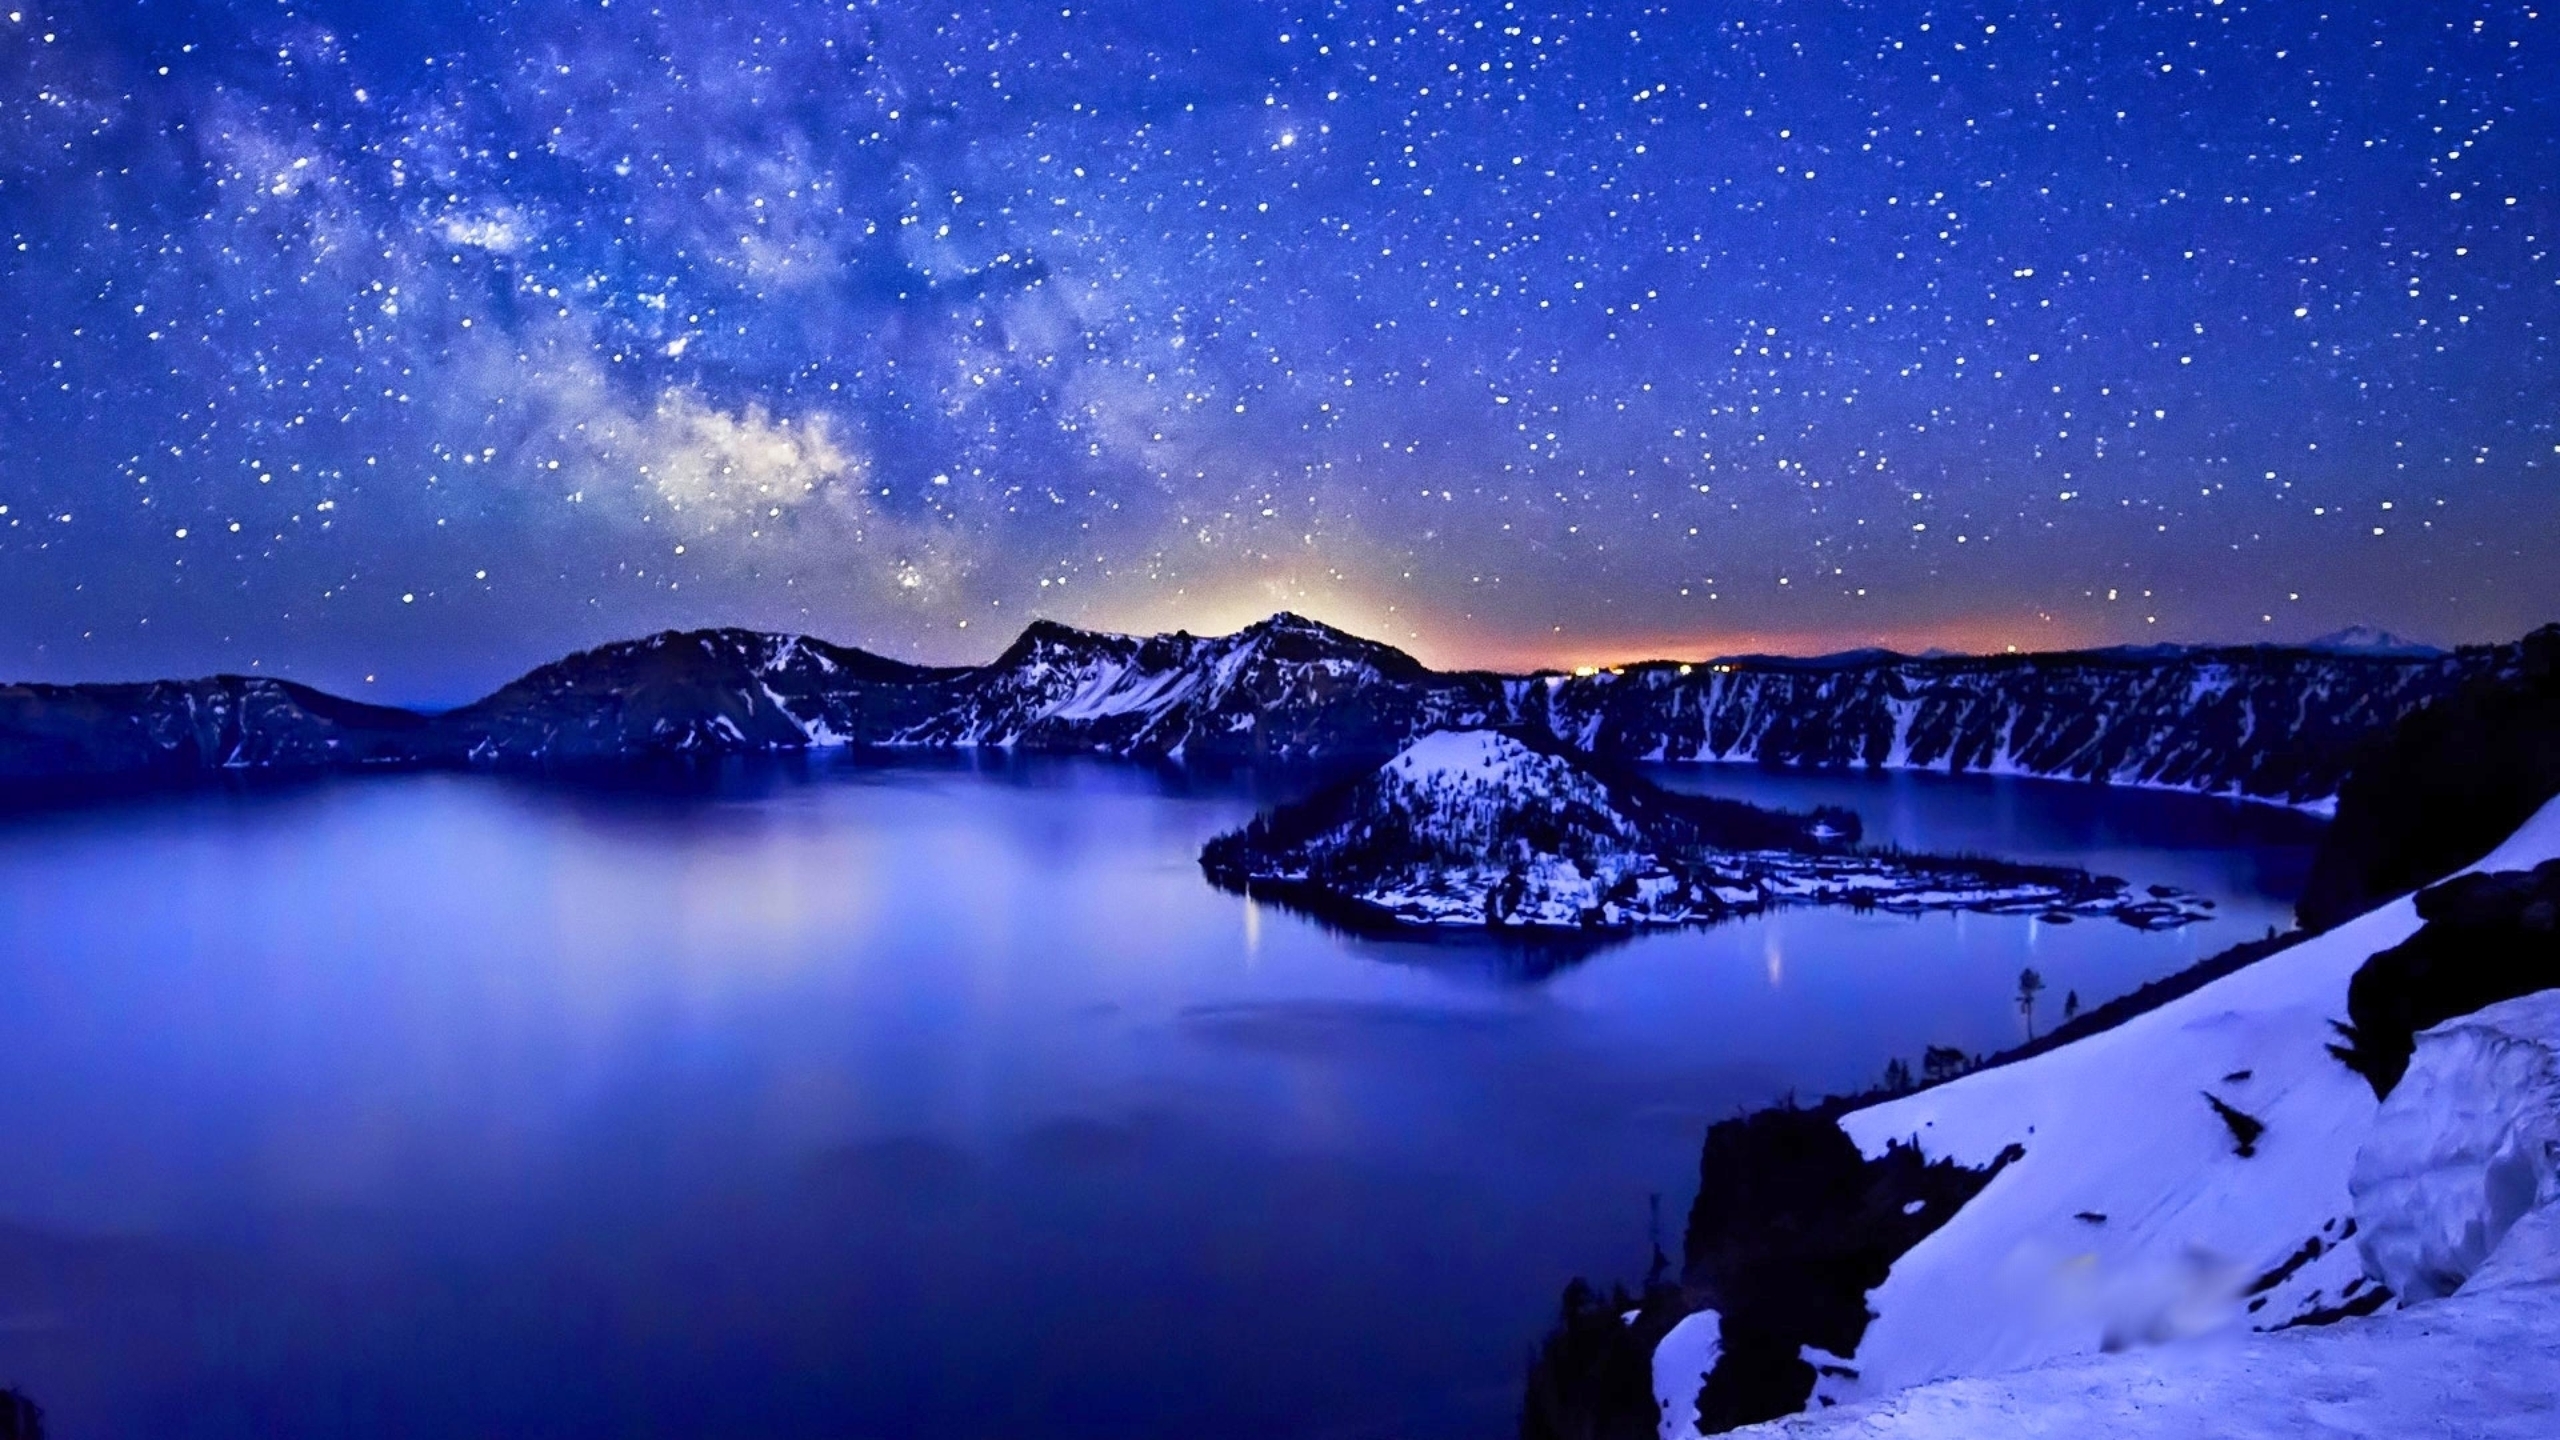 Wallpaper Body of Water Near Snow Covered Mountain During Night Time, Background Free Image